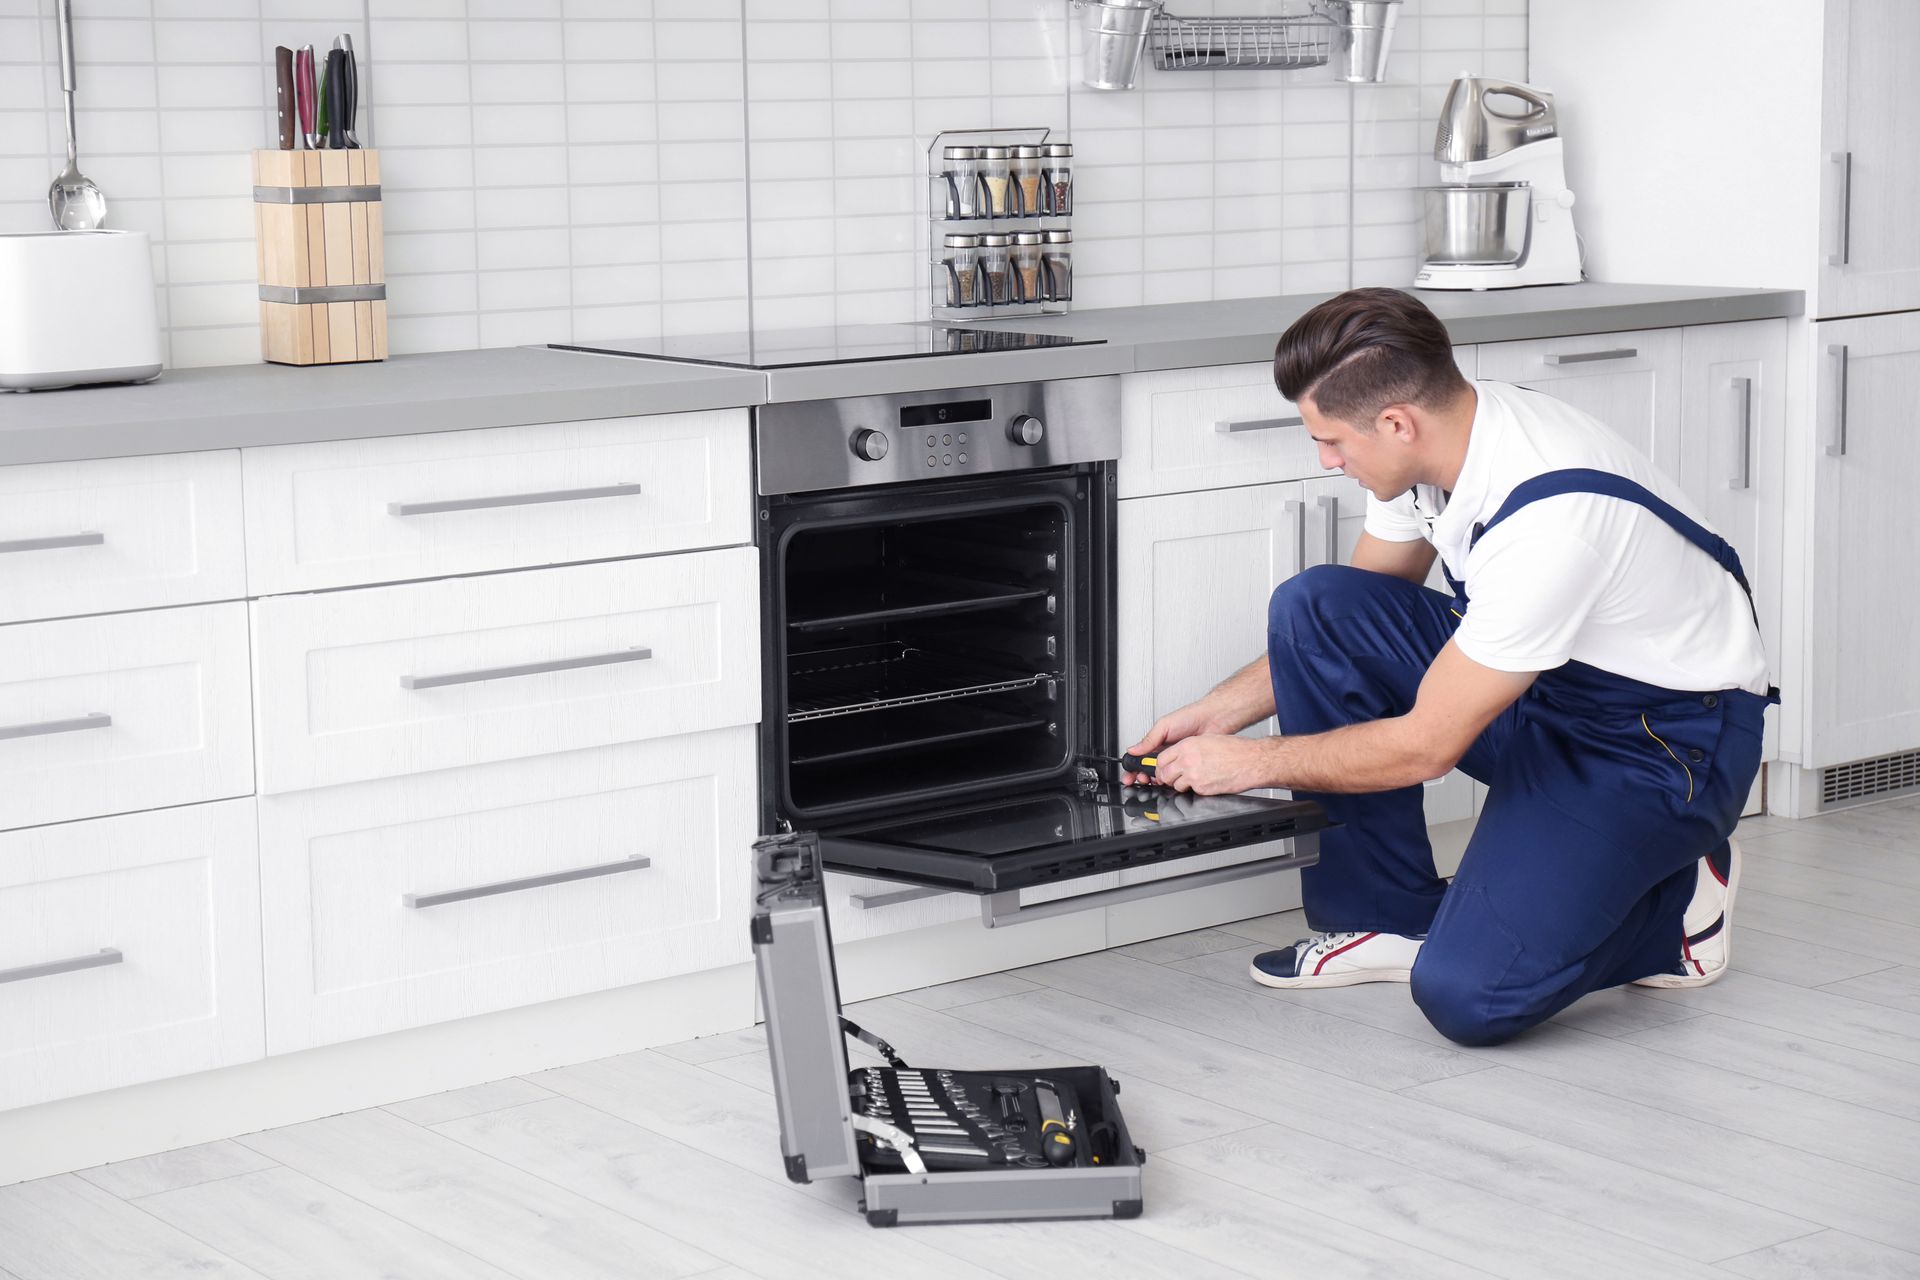 A young handyman wearing blue jeans and a white t-shirt is repairing an oven in a modern kitchen.